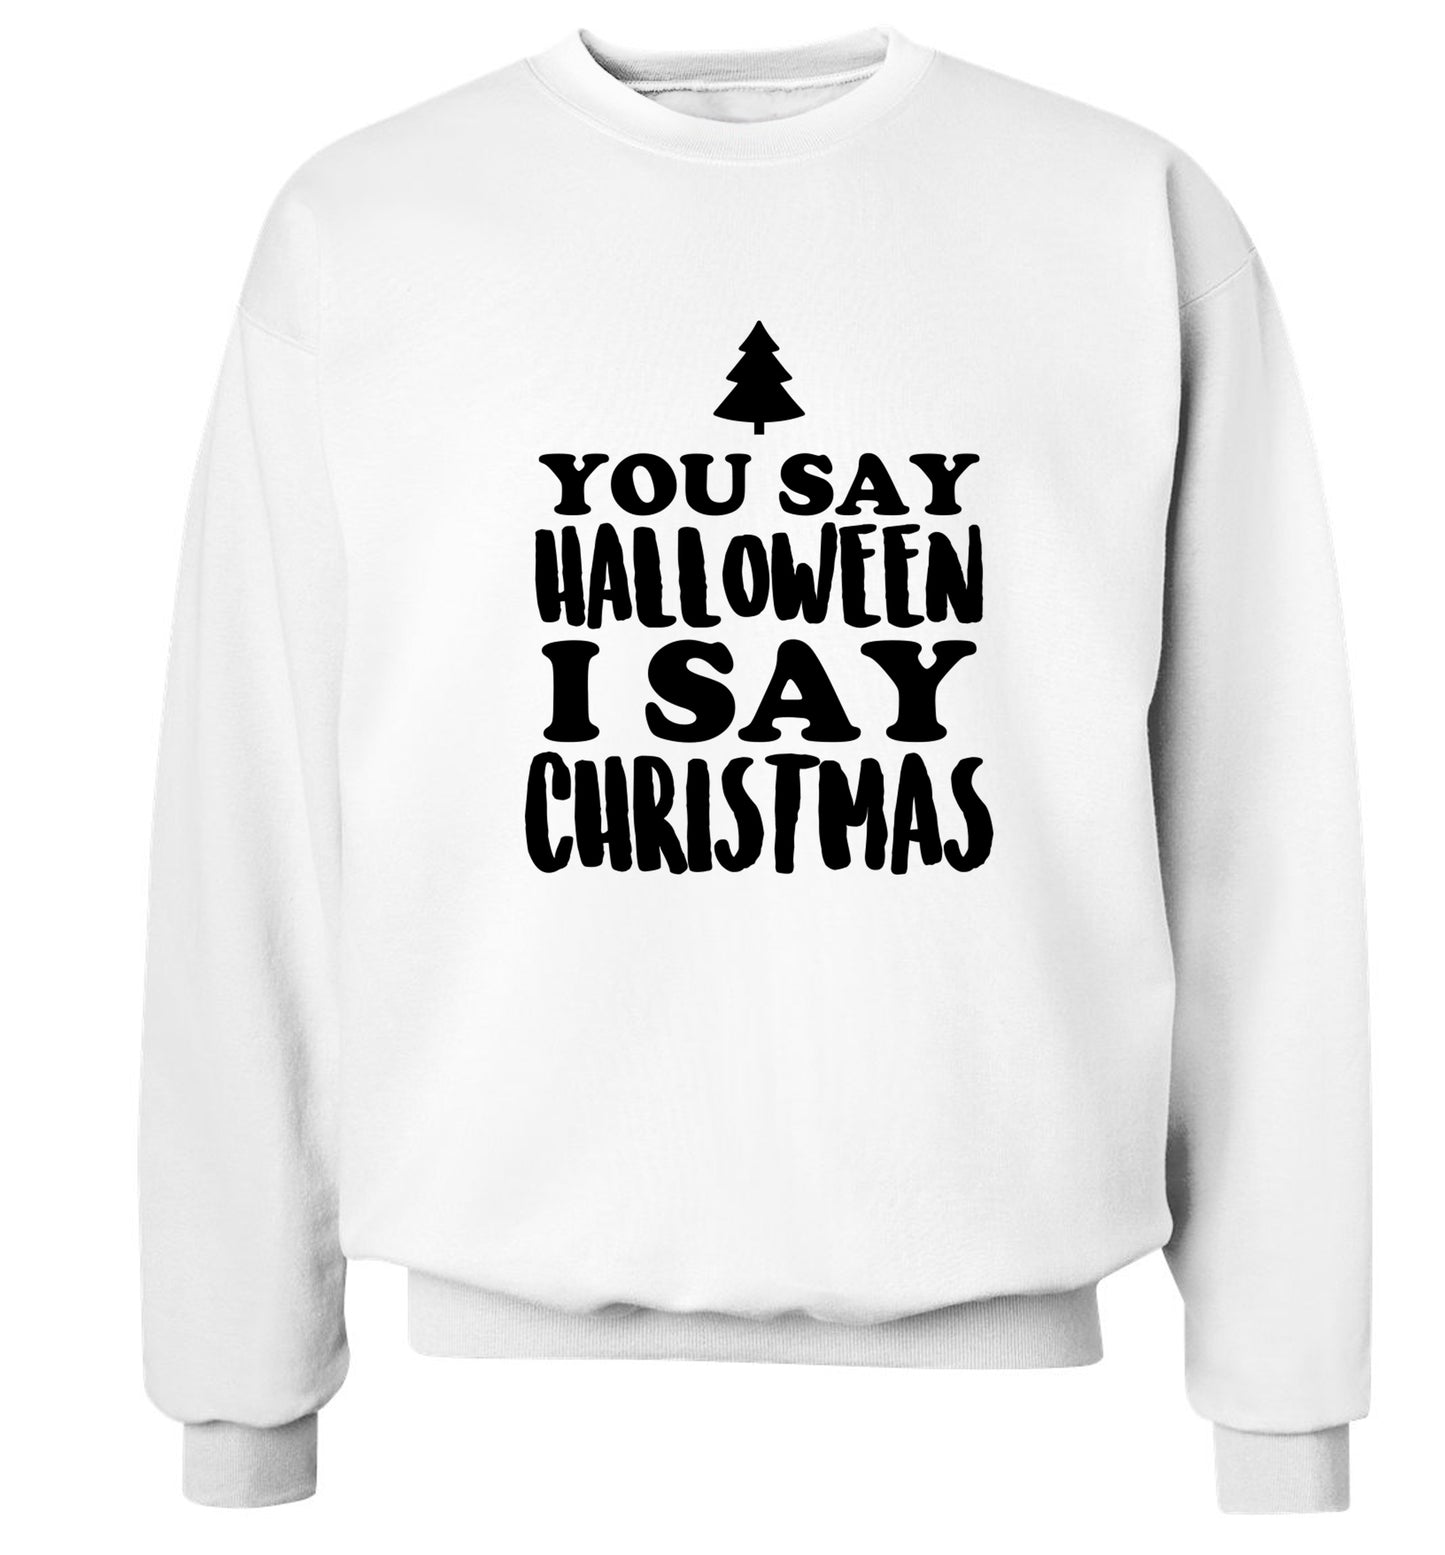 You say halloween I say christmas! Adult's unisex white Sweater 2XL